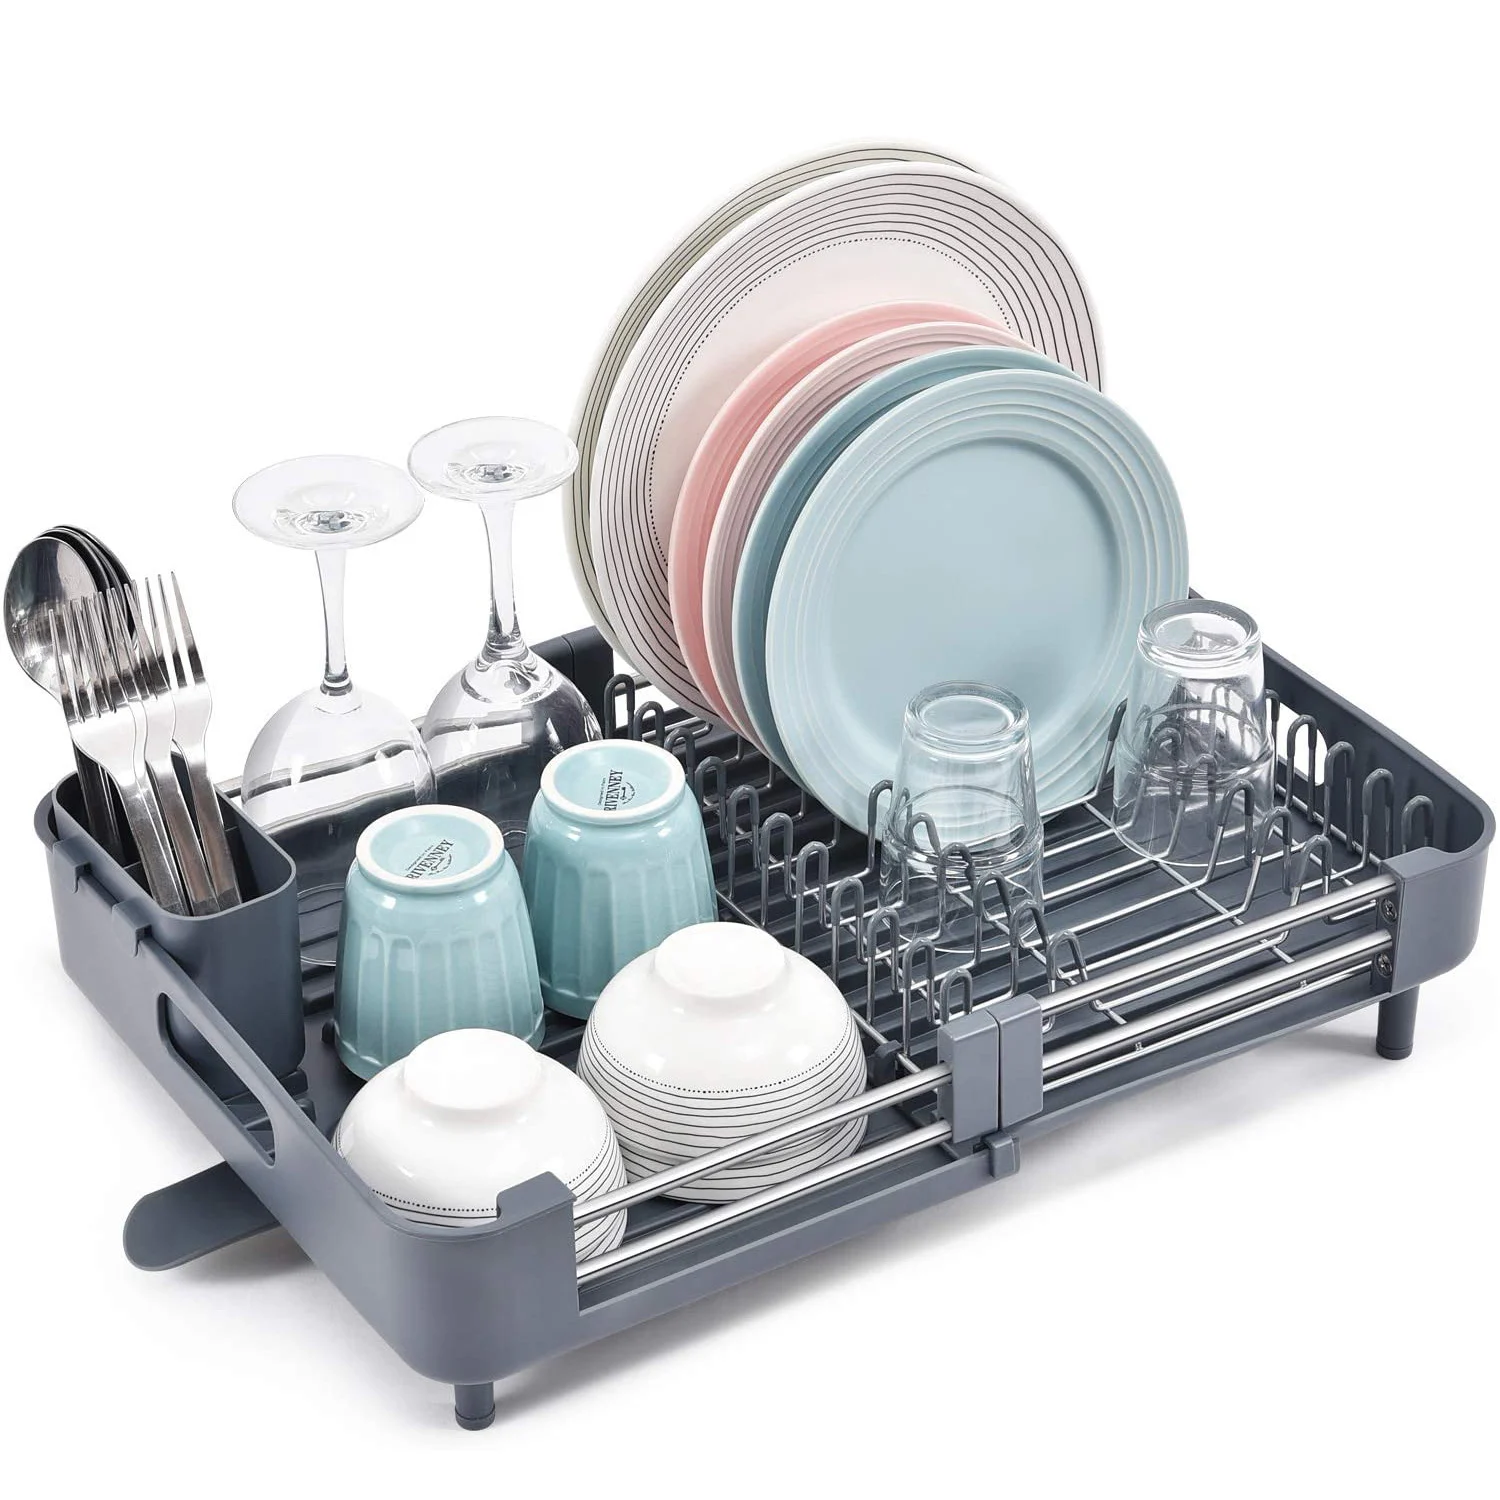 Adjustable Dish Drying Rack,Expandable Dish Rack,Foldable Stainless Steel Dish Drainers With Removable Cutlery Holder&Drainboard